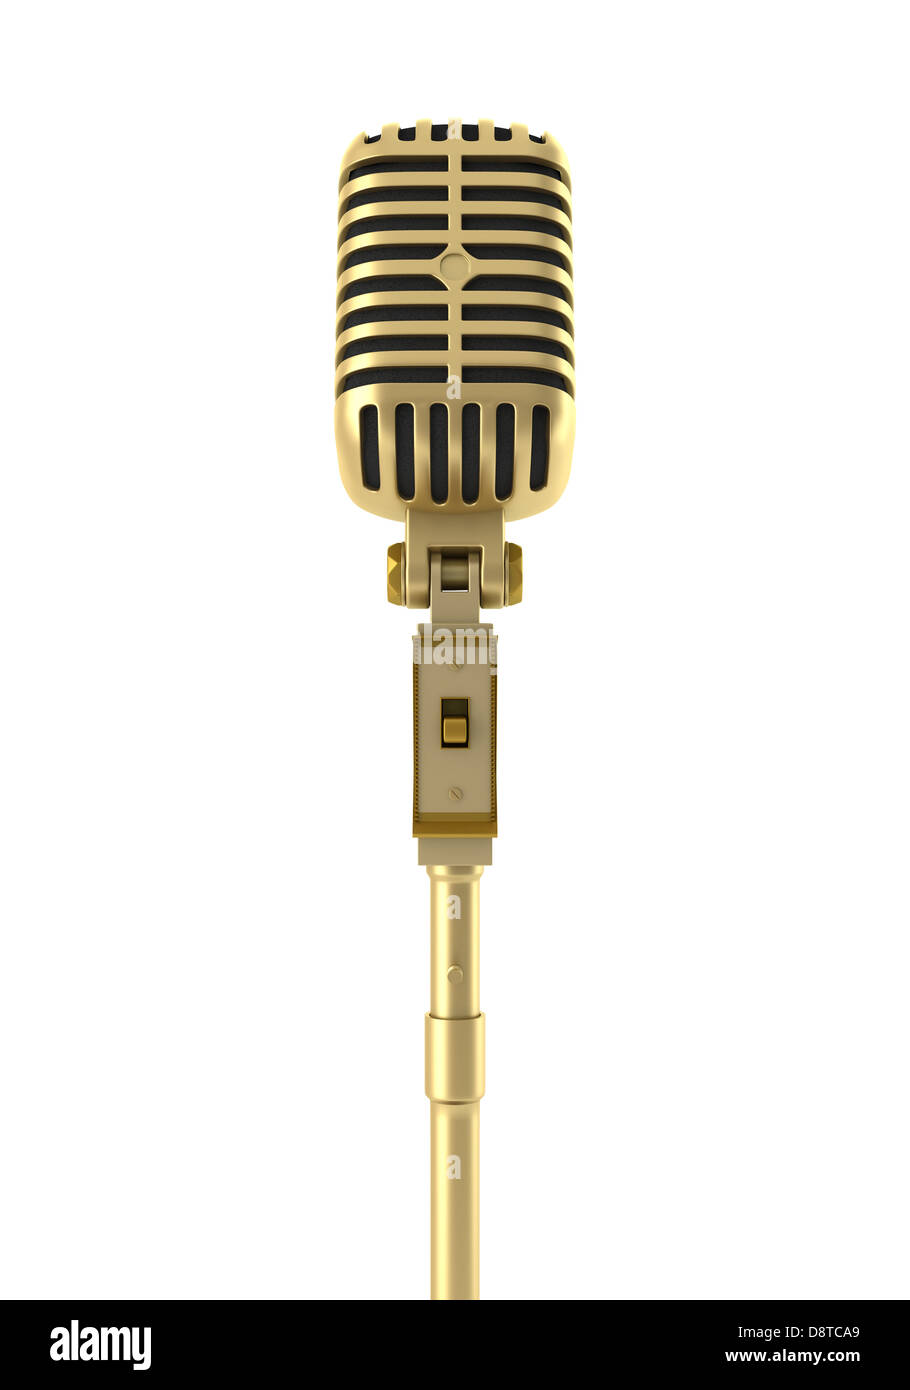 Microphone vintage or isolated on white Banque D'Images